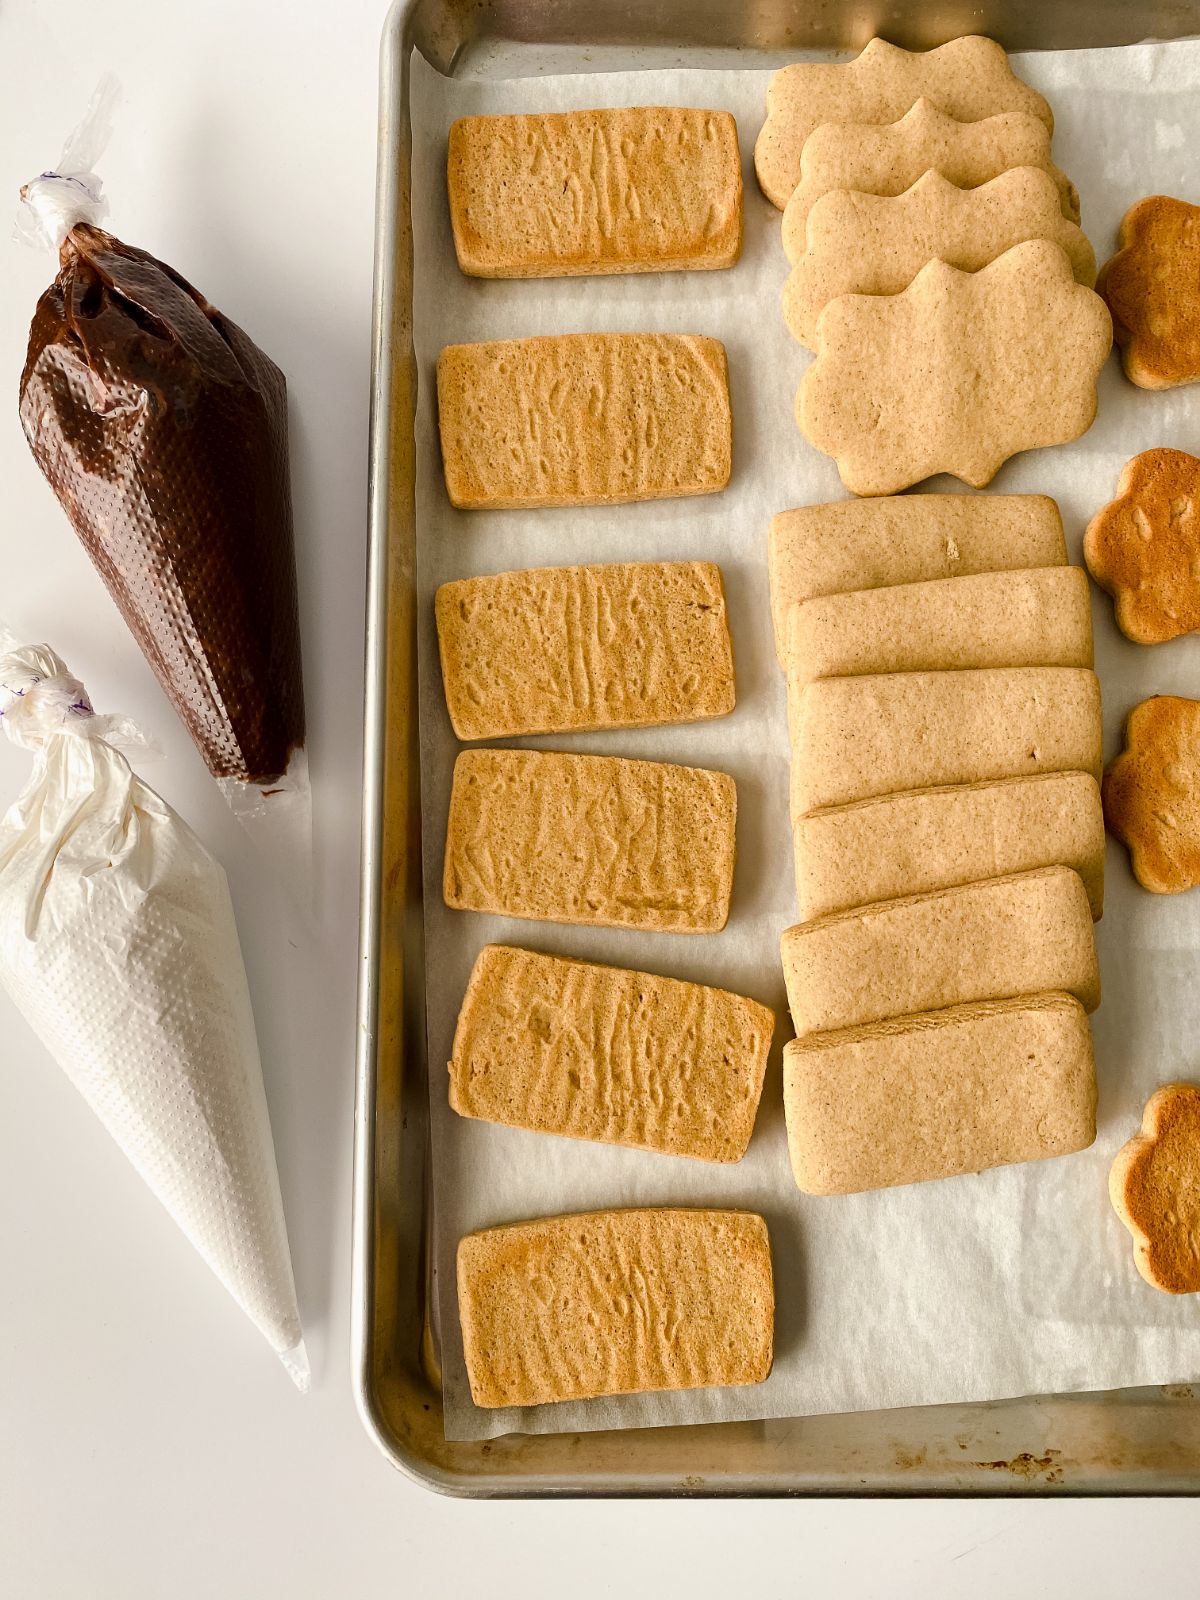 graham crackers on baking sheet by chocolate and marshmallow in piping bags